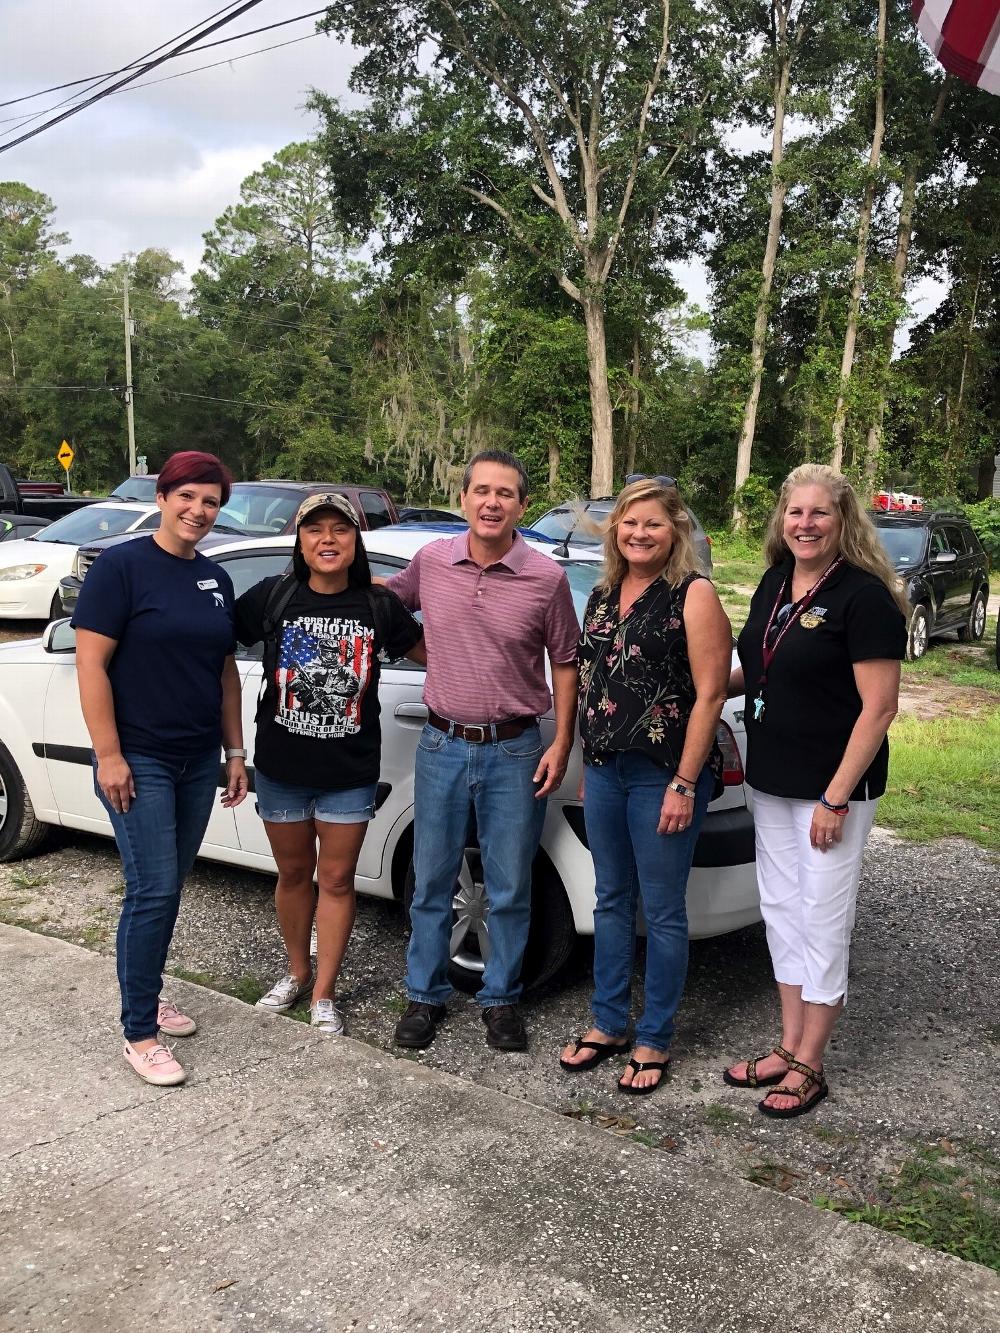 Jacksonville Elks Lodge #221 recently partnered with Operation Barnabus to help purchase a vehicle to enable a local veteran transportation for herself and her family, who has been going through difficult times dealing with PTSD.
 Jacksonville Elks used $500.00 from the Elks National Foundation Freedom Grant for their first donation of the grant, along with the help of the owner of Mercy Automotive Charitable Foundation, Karla, and Operation Barnabus, to help our first recipient, Dee a is a Navy Veteran.  Dee, the mother of three children, ages 17, 12 and 10, was introduced to Operation Barnabus several months ago through local veterans she had met.  In that time since, she has received the help and support from volunteers at Operation Barnabus who have helped her overcome her struggles with PTSD.  This support, along with the strength and power of faith, has empowered her to move forward with her life in a good and positive way, and our Jacksonville Elks Lodge is humbled and privileged to have been a part of making this huge difference in Dee’s life.  In Dee’s words, time and time again, “God is good!!” 
Operation Barnabas is a faith based nonprofit organization assisting military veterans and first responders who struggle with Post Traumatic Stress Disorder (“PTSD”).  By providing sanctuary, meeting physical needs, and linking resources, their purpose is to provide hope, encouragement, and mentorship to at-risk veterans and first responders through outreach and resources in a swift and timely manner.  
Operation Barnabus endeavors to ignite a positive transformation in those striving to find purpose and meaning and is funded by the support of generous donors.  
Pictured left to right: Karla – Owner of Mercy Automotive Charitable Foundation, Ms. Dee – Navy Veteran, Pastor John Green – Operations Officer of Operation Barnabus, Robin Pipkins – ENF Grant Chairwoman of Jacksonville Elks Lodge #221, and Deborah Reedy PER – Secretary of Jacksonville Elks Lodge #221.

#ElksCareElksShare


